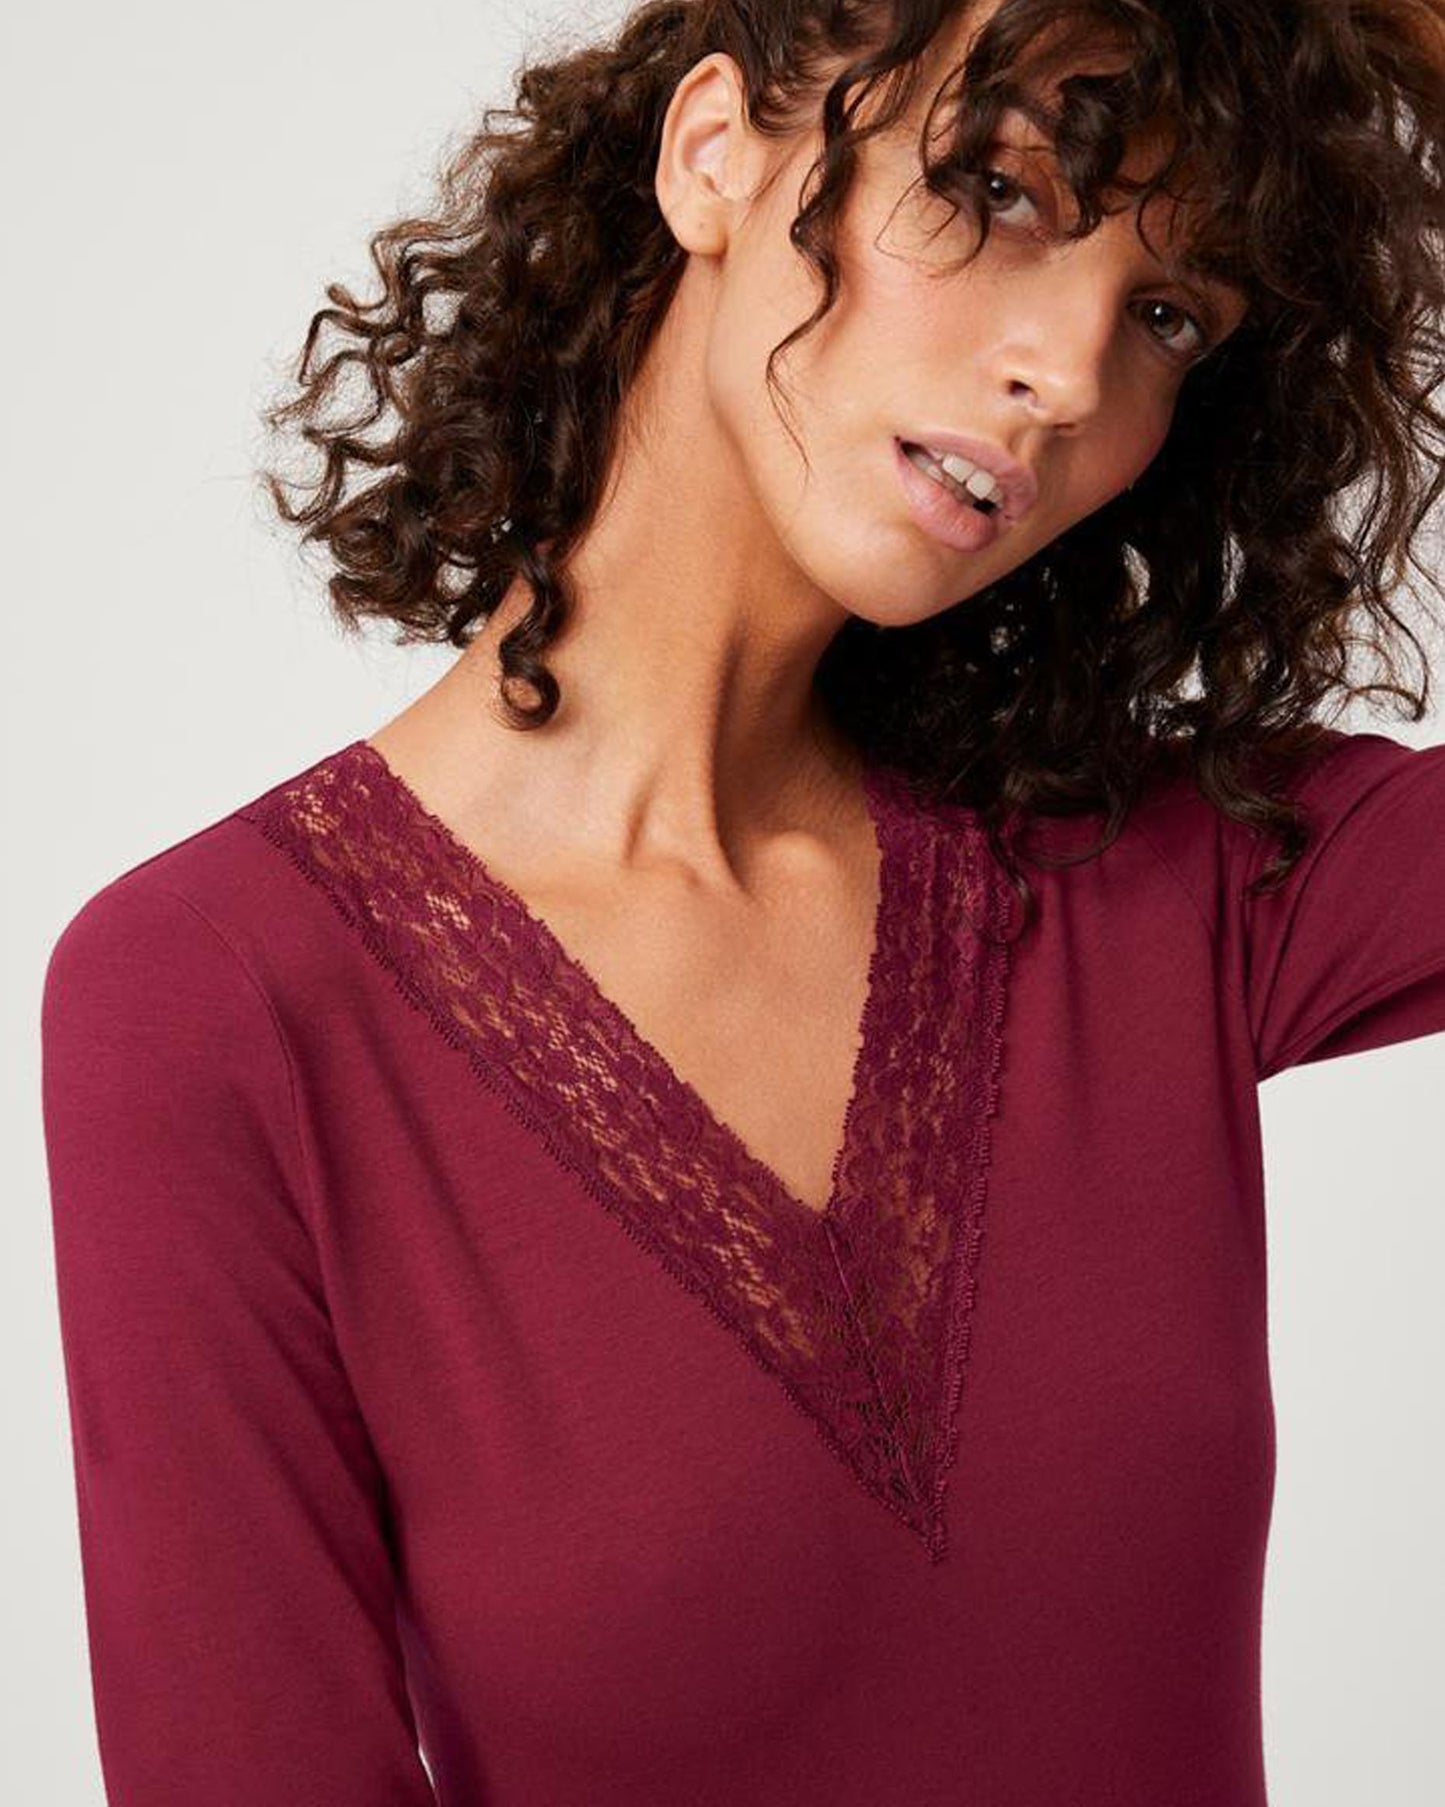 Soft and light long sleeved wine vest top with a floral lace trim v-neck and lace trim cuffs.